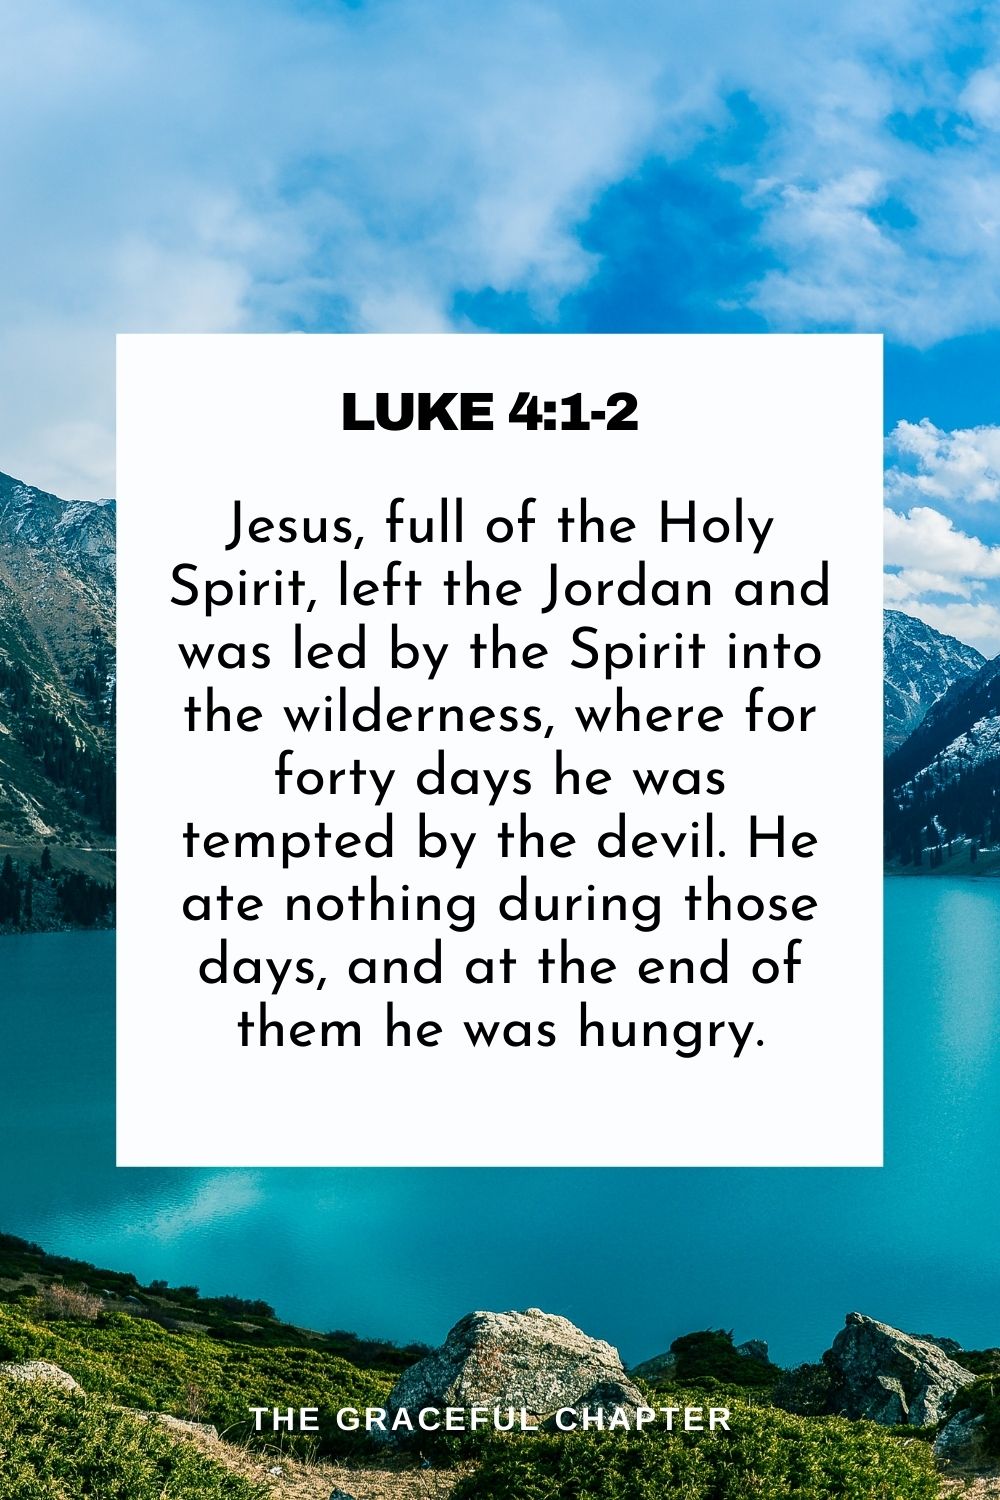 Jesus, full of the Holy Spirit, left the Jordan and was led by the Spirit into the wilderness, where for forty days he was tempted by the devil. He ate nothing during those days, and at the end of them he was hungry. Luke 4:1-2